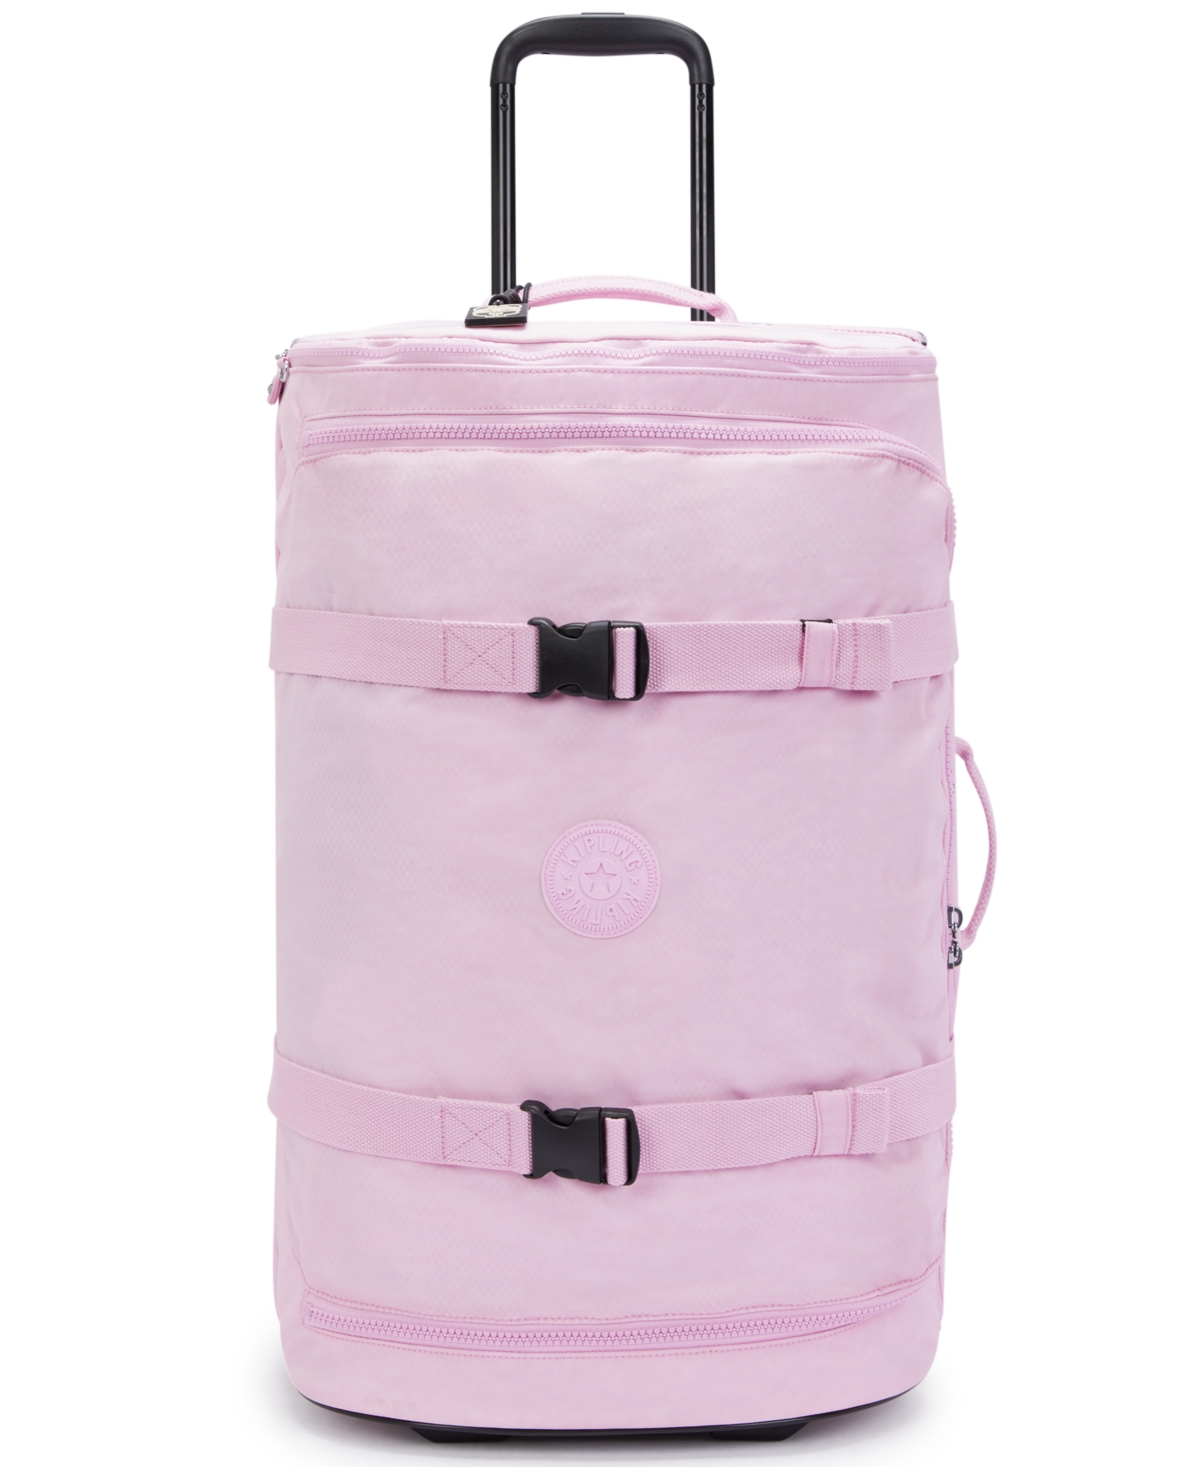 Aviana Medium Rolling Carry-On Luggage - Blooming Pink